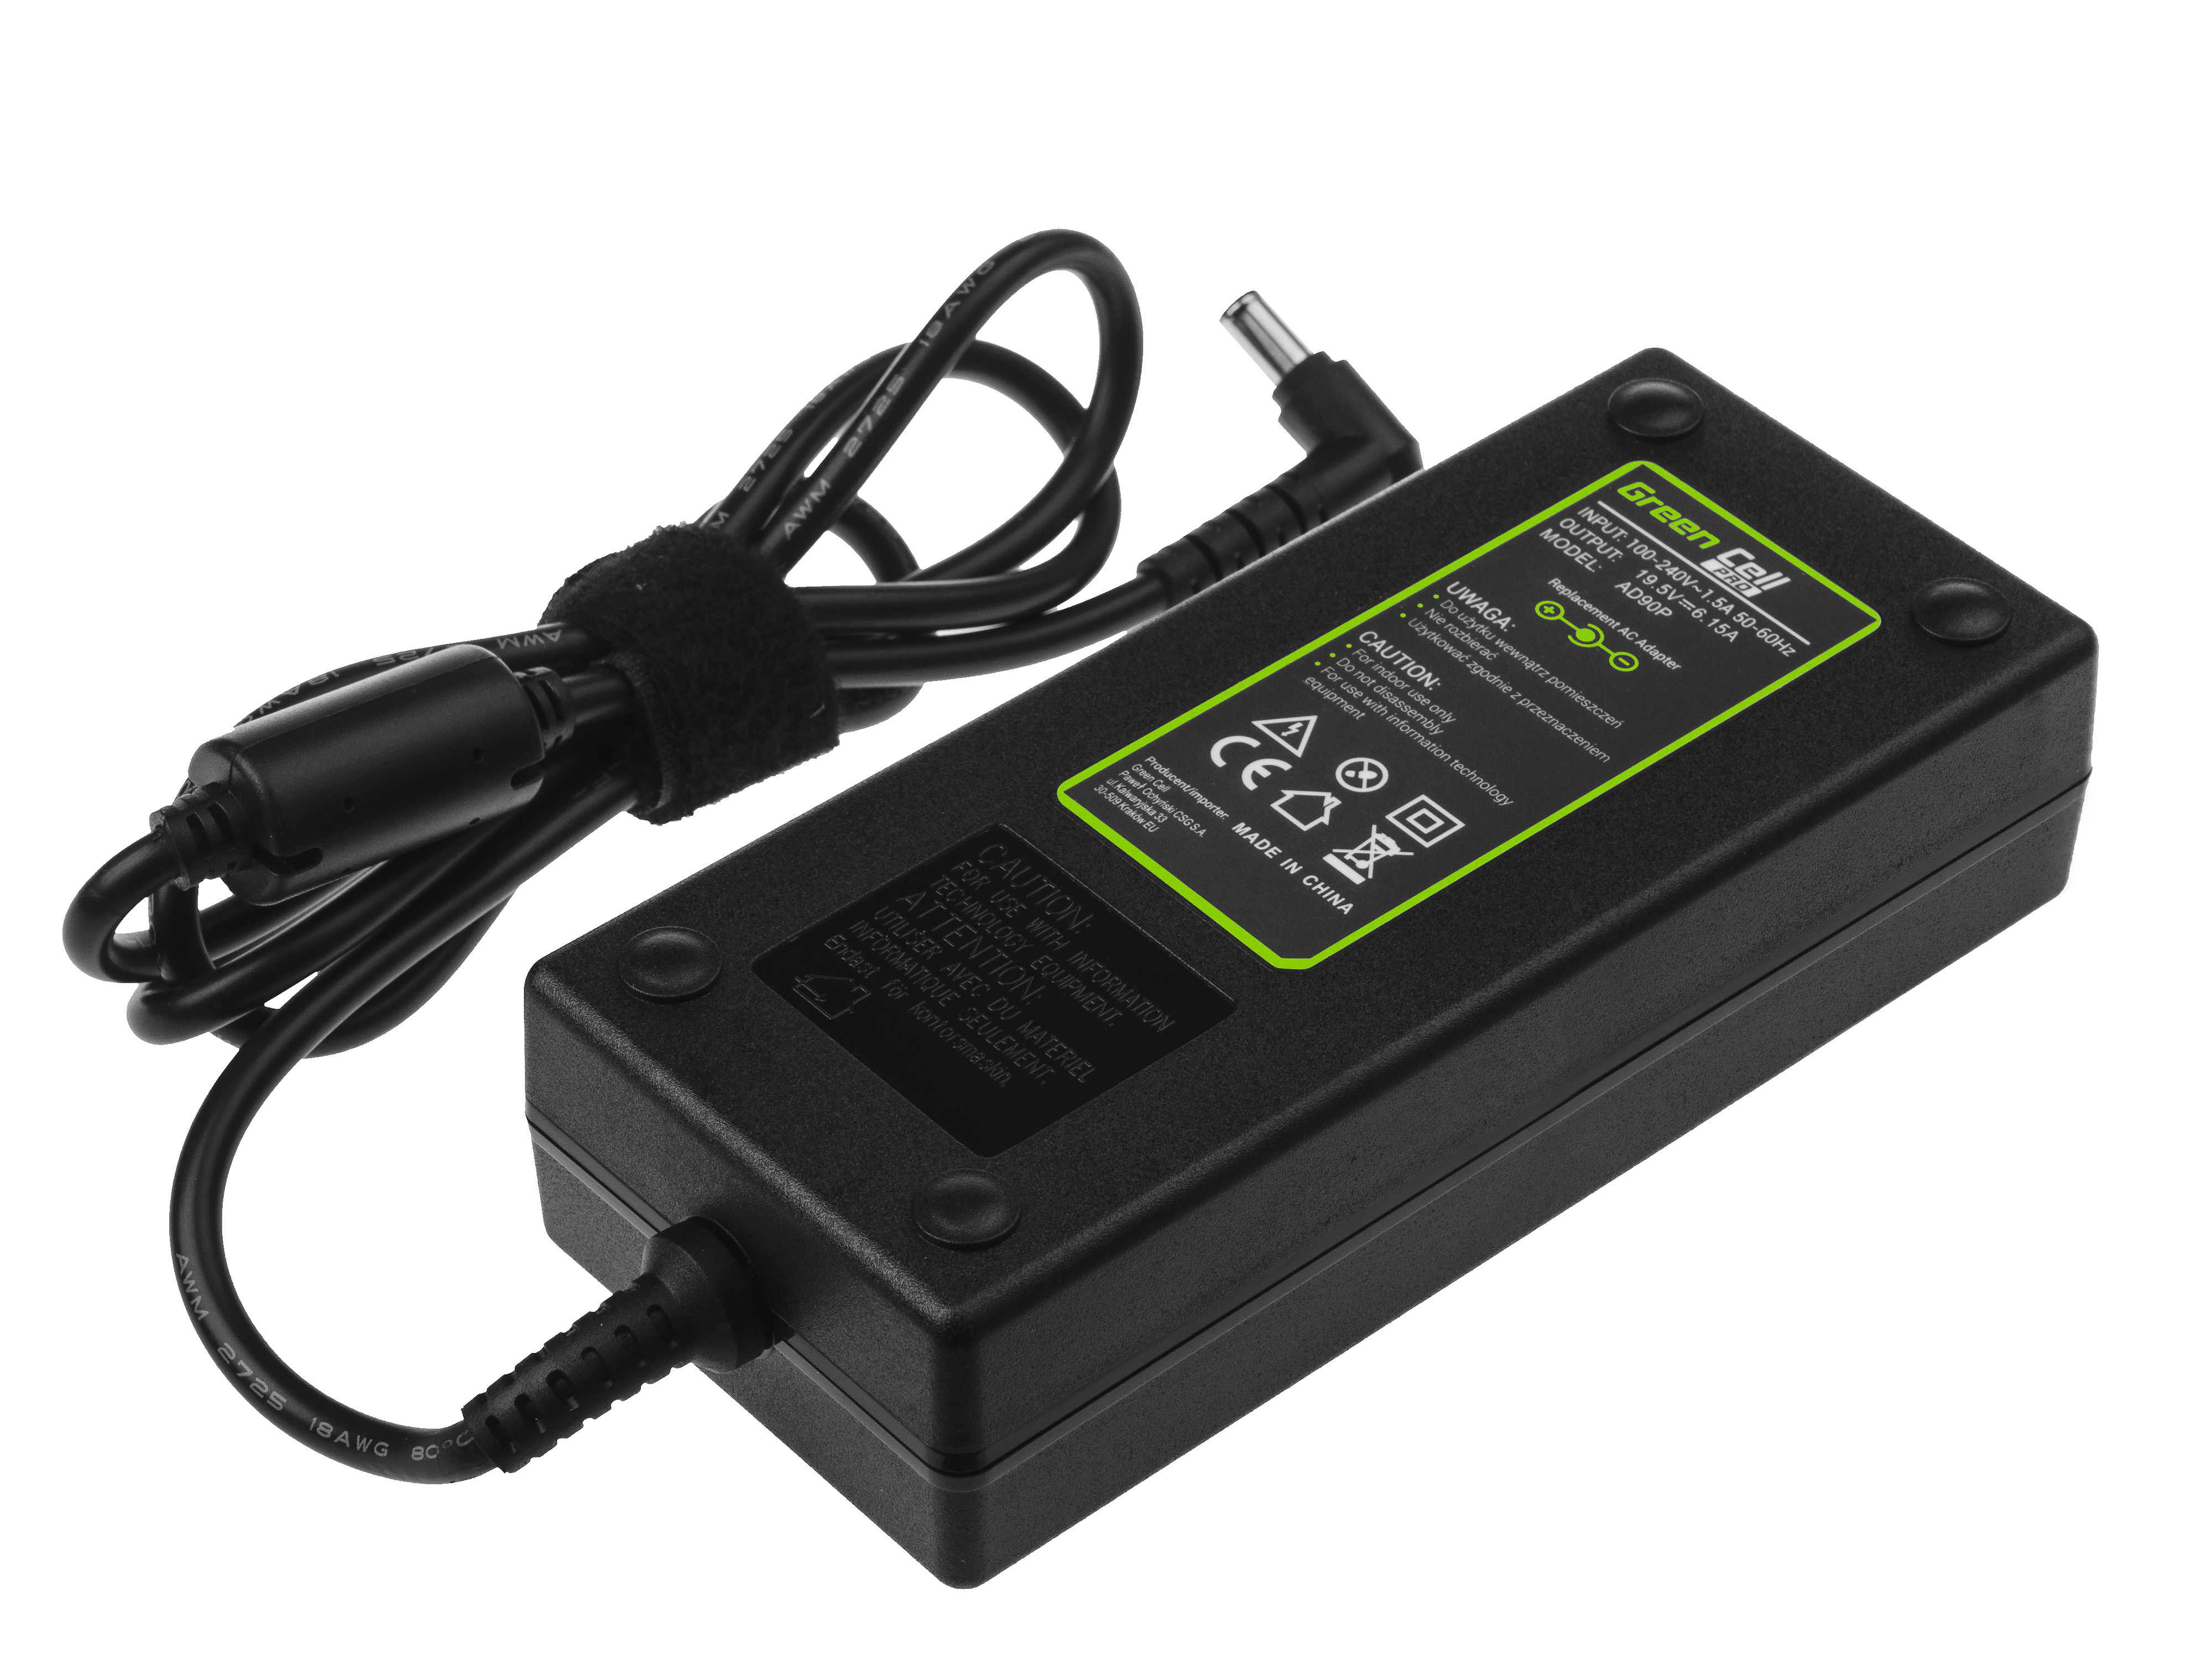 Green Cell PRO Charger / AC Adapter 19.5V 6.15A 120W for Sony Vaio PCG-81112M VGN-AR61S VGN-AR71S VGN-AW31S VPCF11S1E